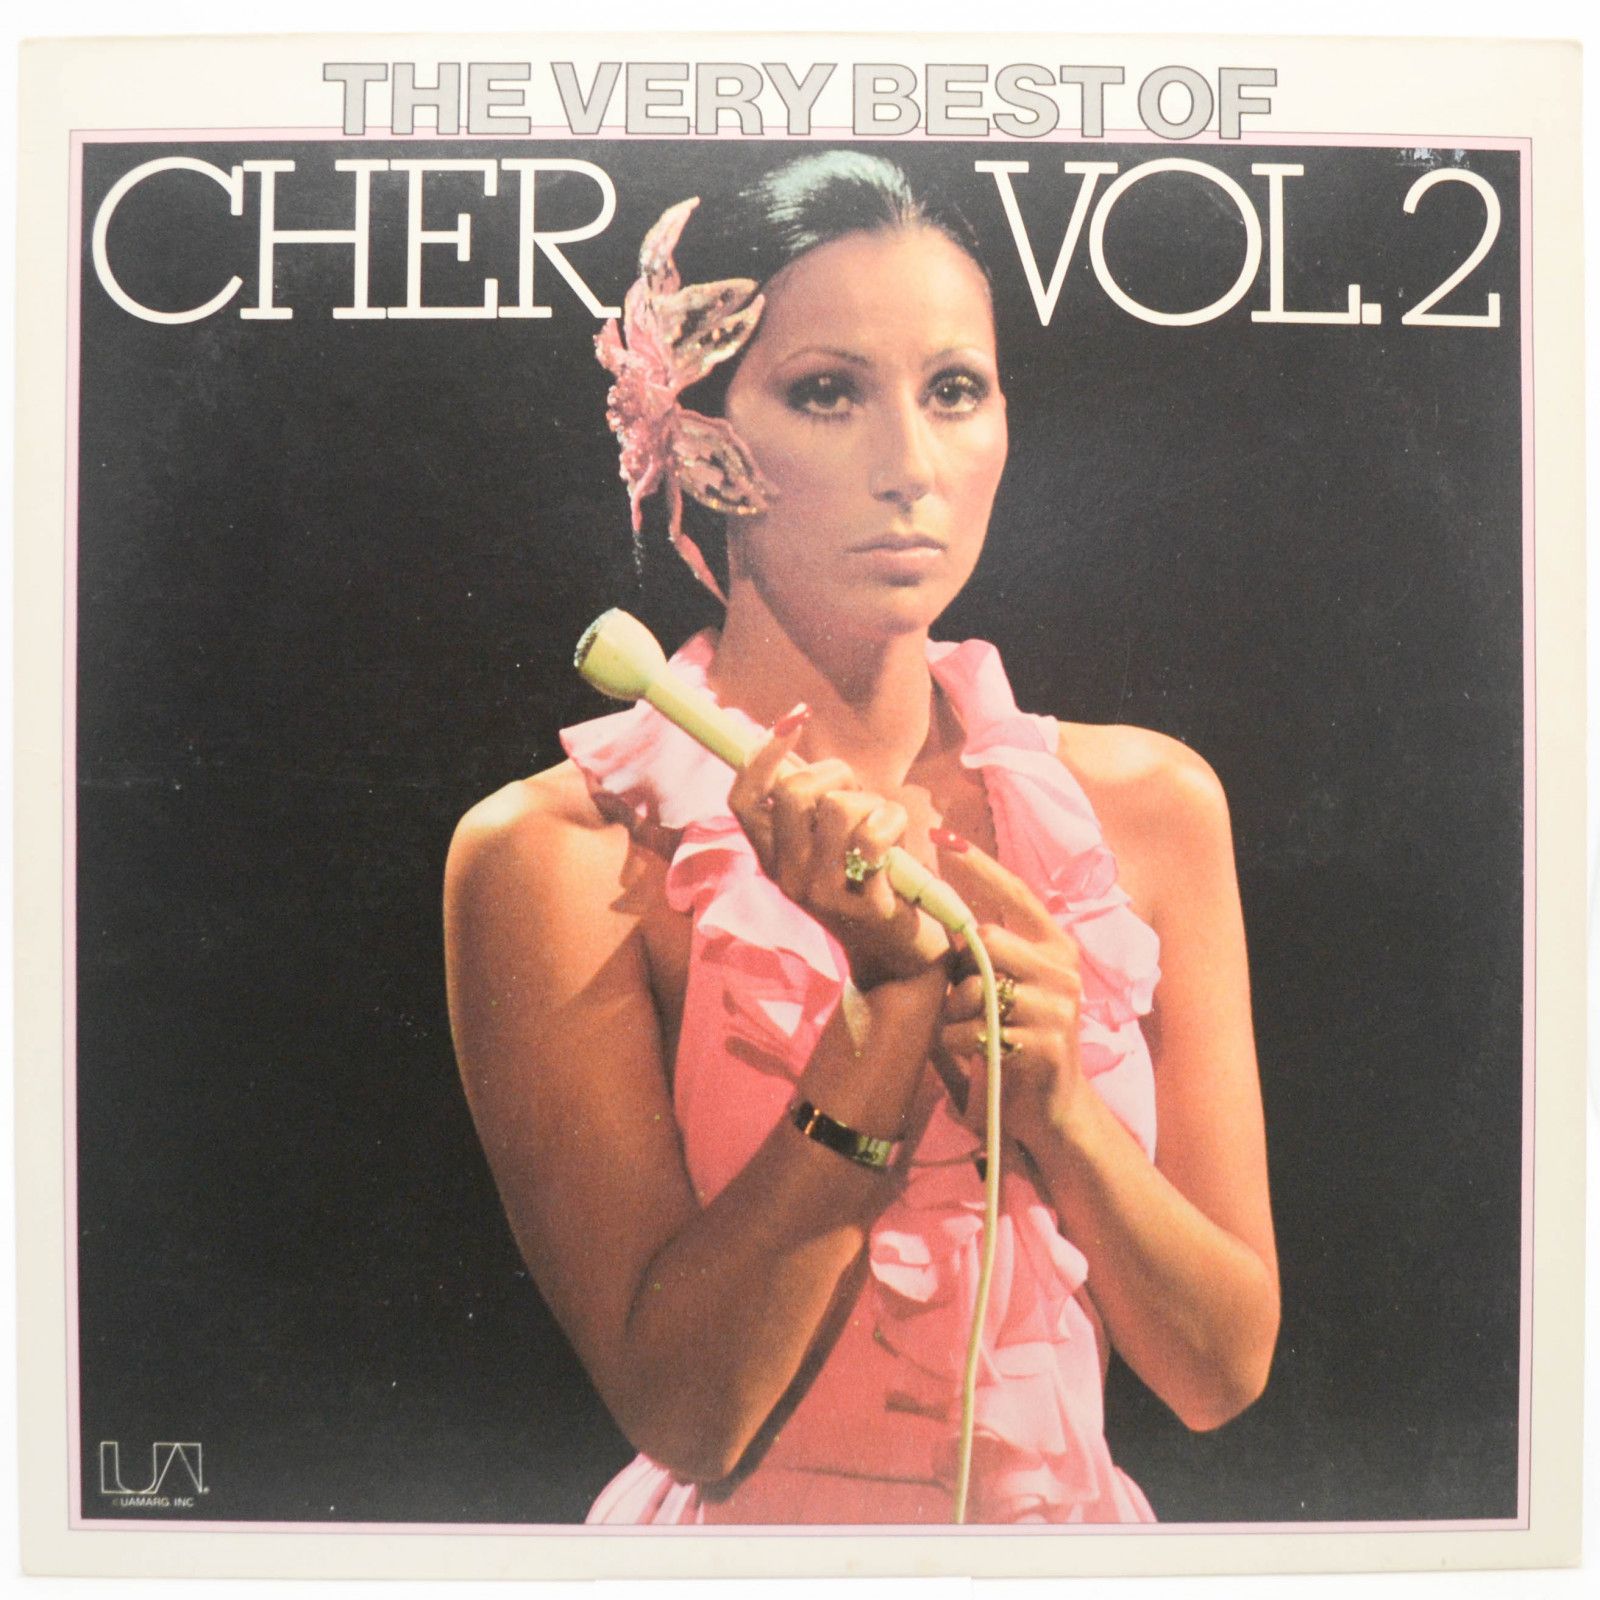 Cher — The Very Best Of Cher Vol. 2, 1975